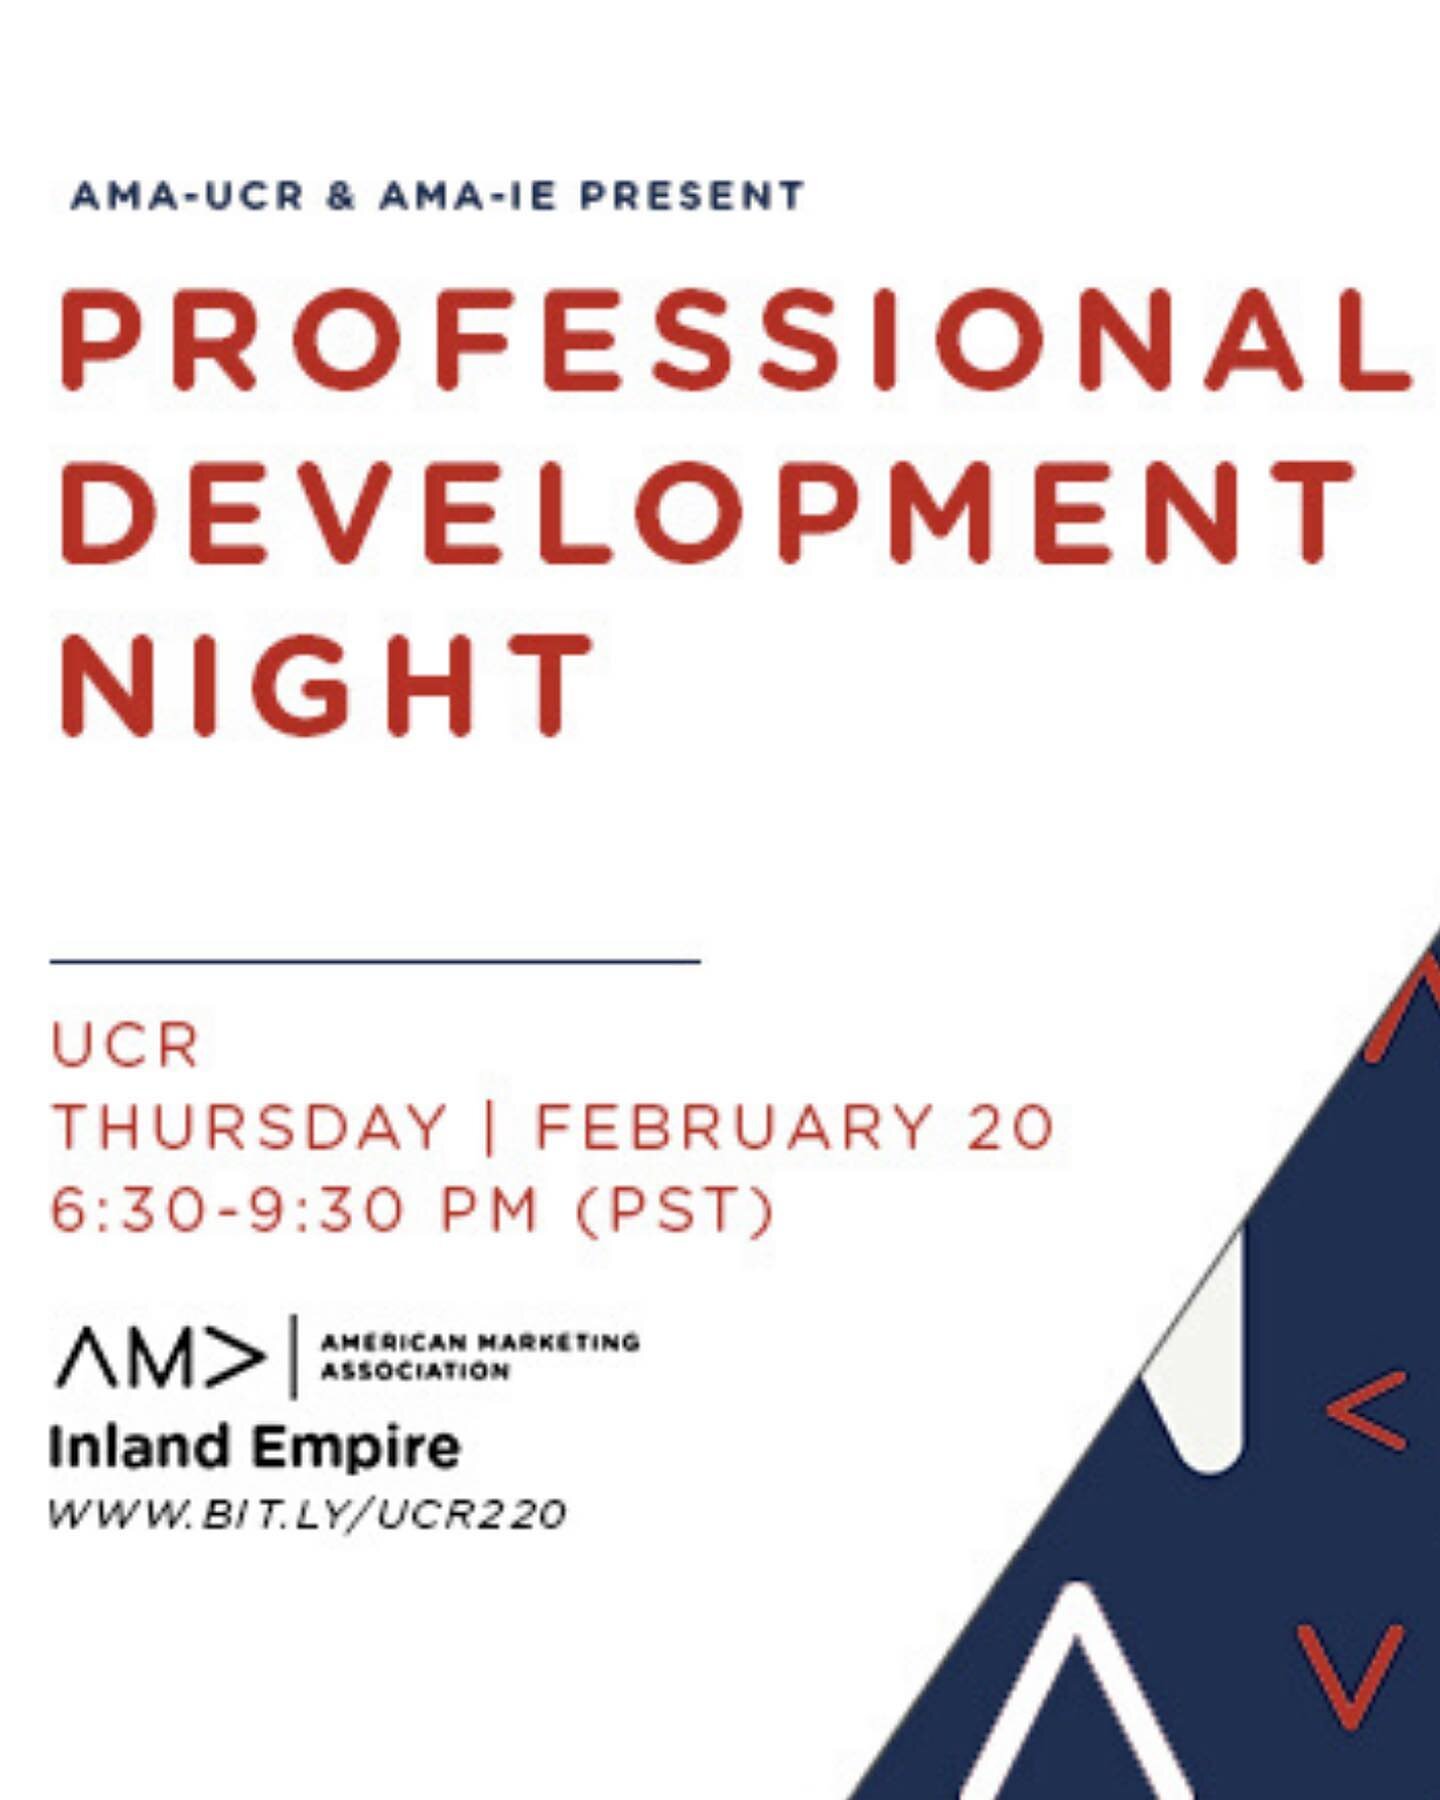 Join us along with @amaucr for a Professional Development Night. 
Find out what recruiters from FORTUNE&rsquo;s &ldquo;Top 100 Companies to Work For&rdquo; are looking for on your Resume, LinkedIn and at your Interview.

Panelist Speakers from @ernst